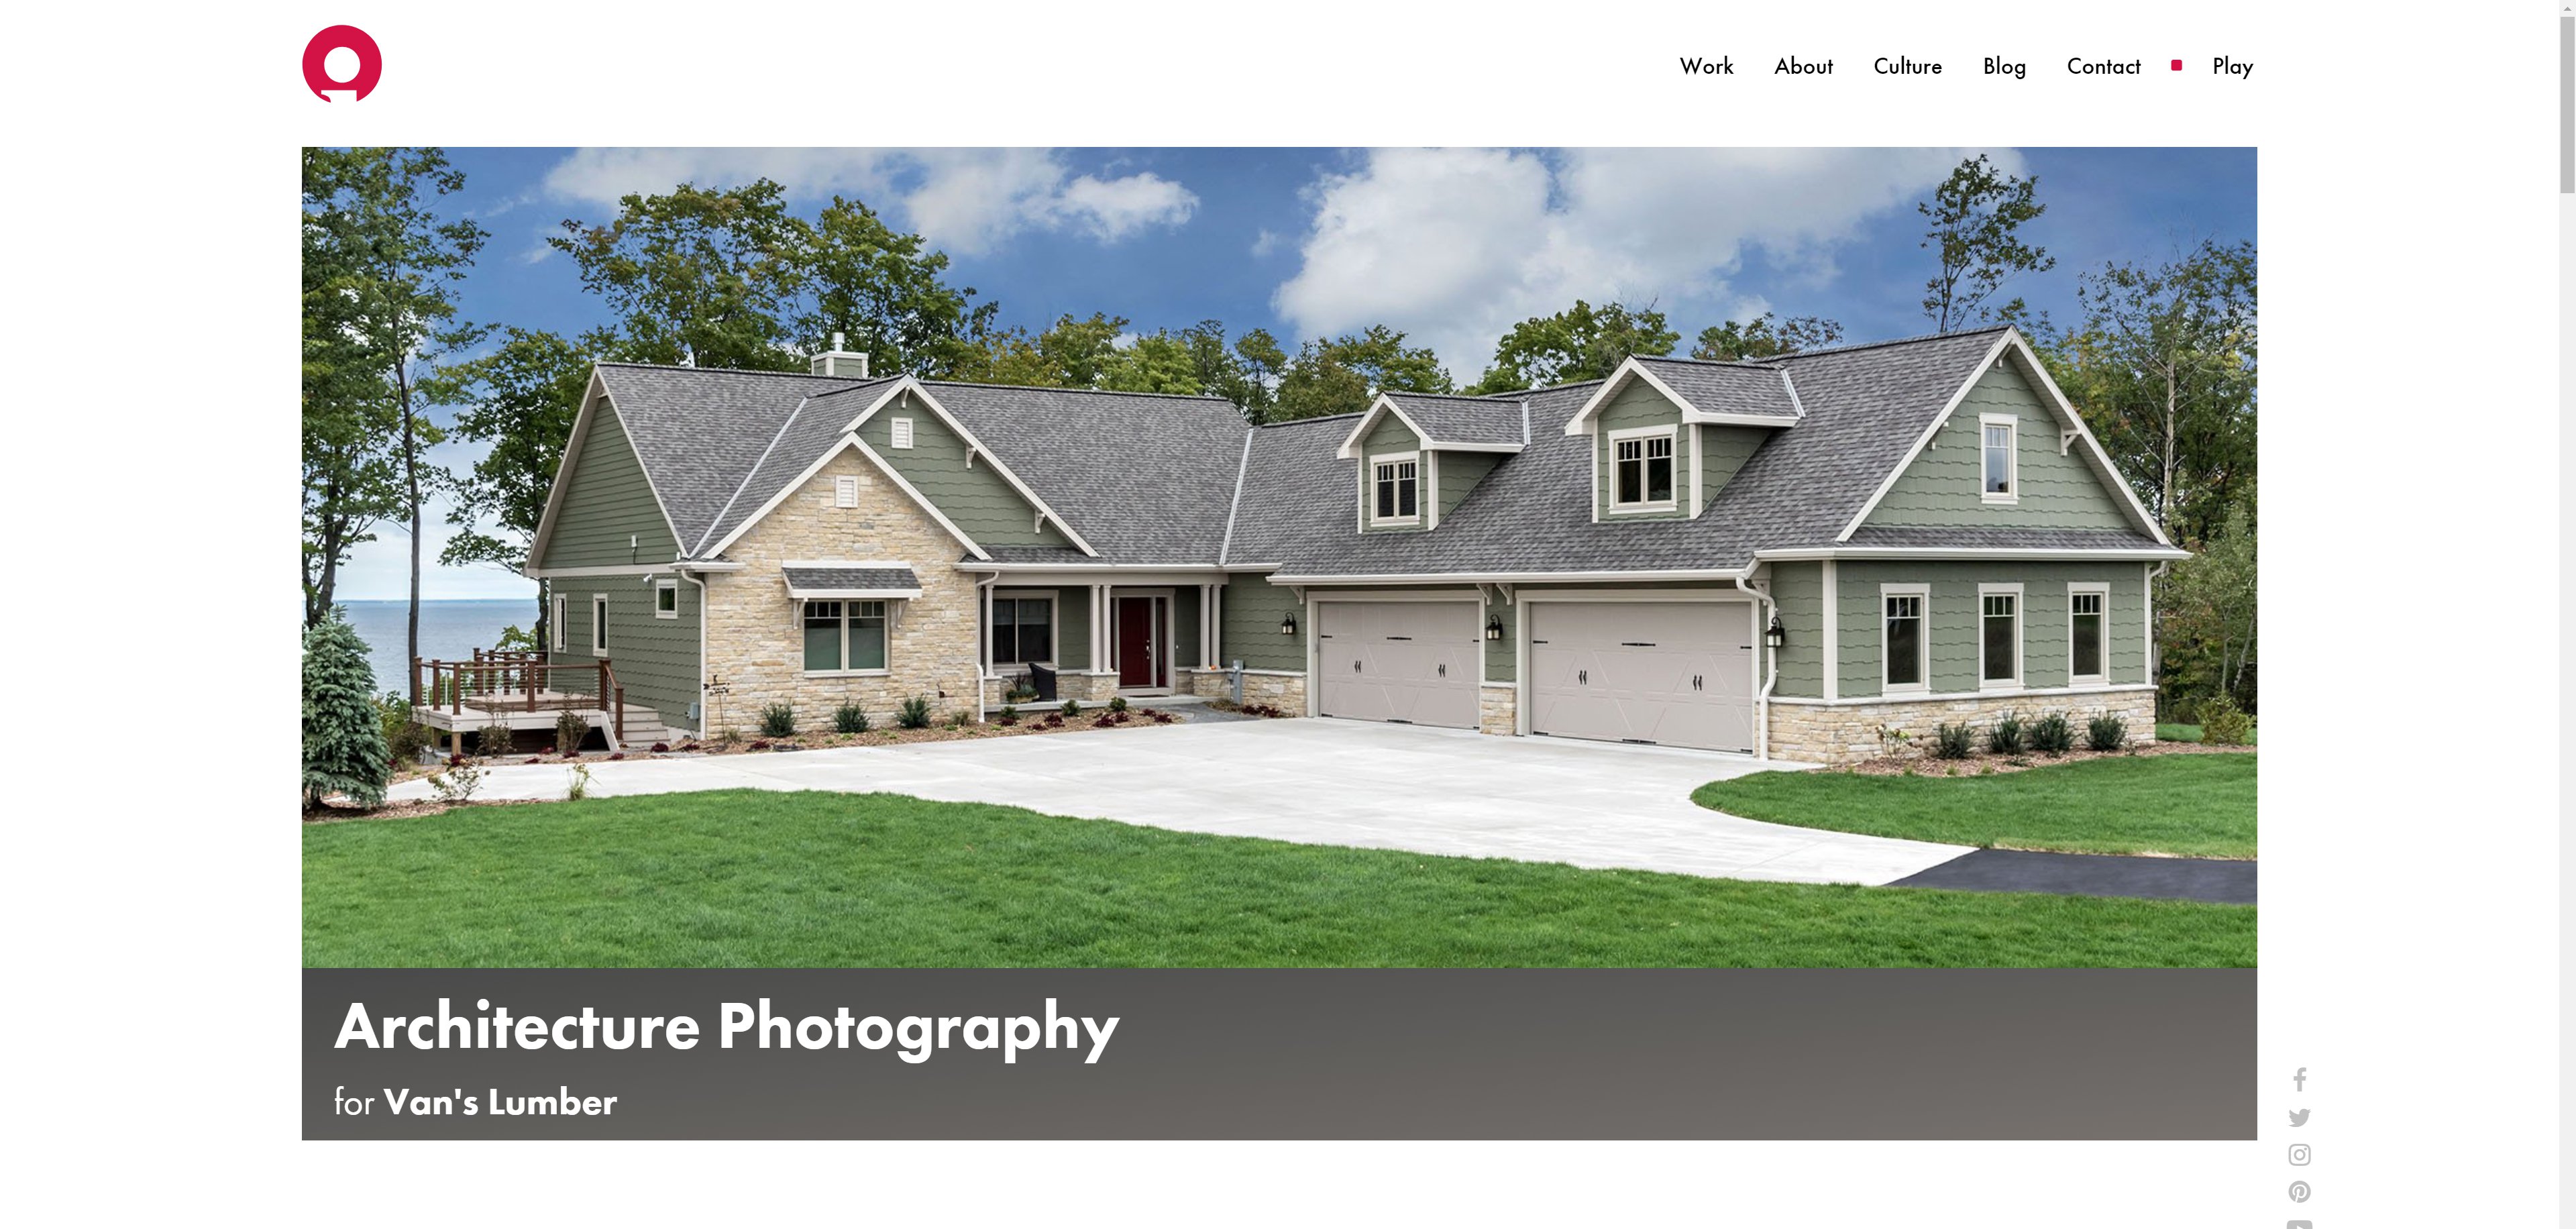 New Website Imagery